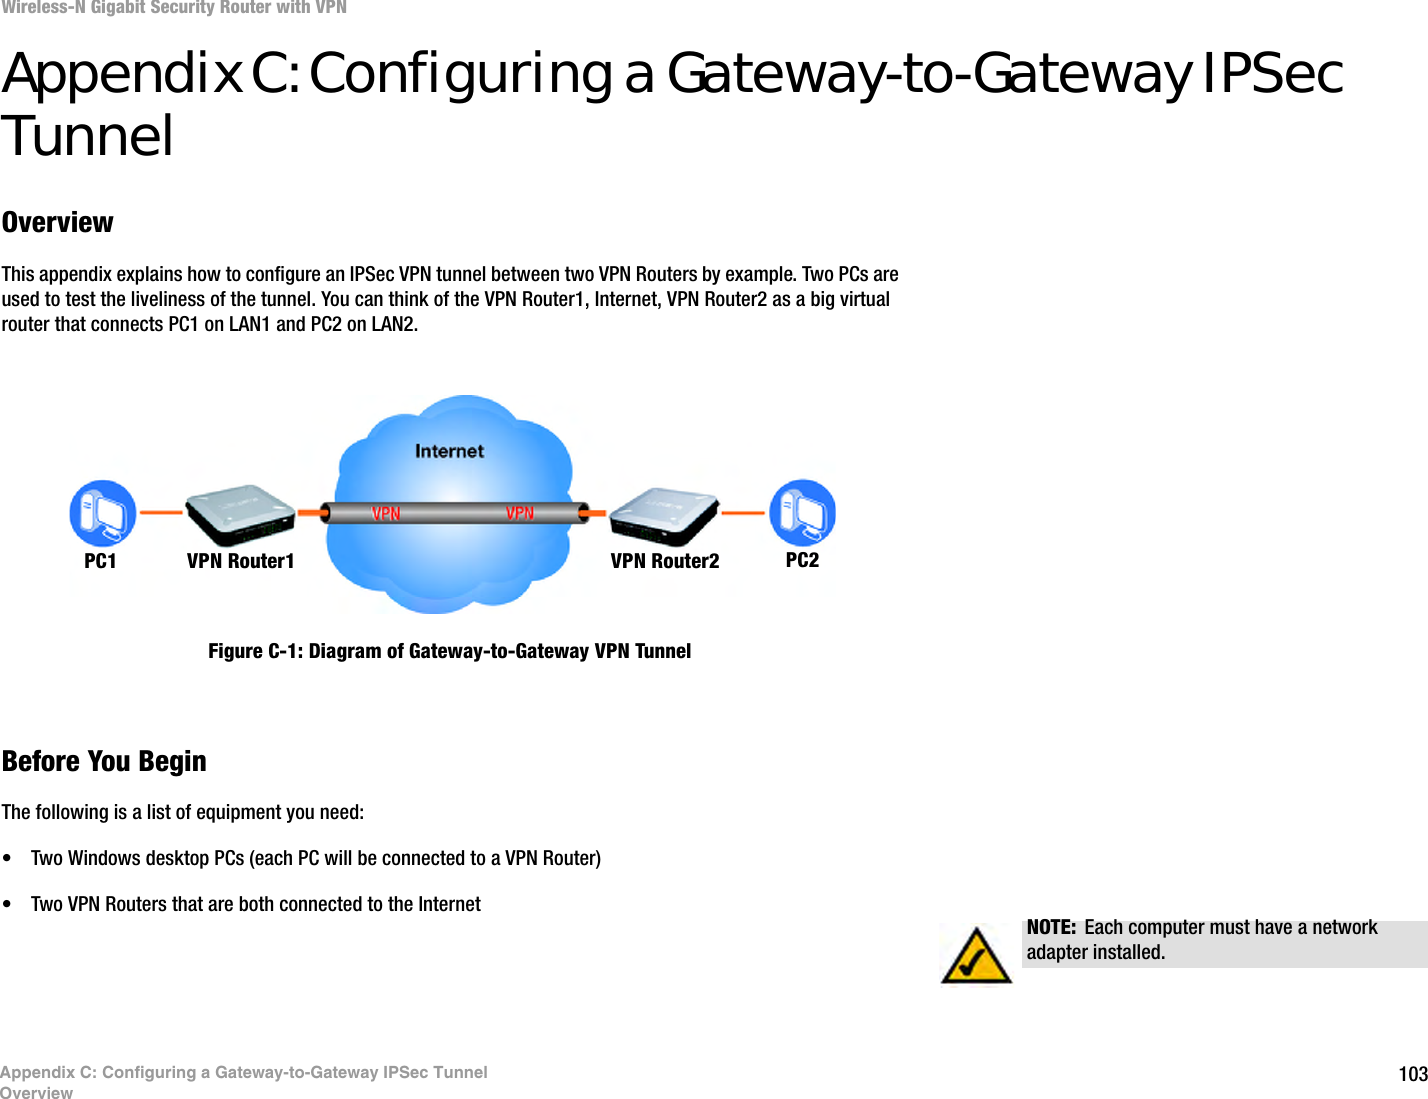 103Wireless-N Gigabit Security Router with VPNAppendix C: Configuring a Gateway-to-Gateway IPSec TunnelOverviewAppendix C: Configuring a Gateway-to-Gateway IPSec TunnelOverviewThis appendix explains how to configure an IPSec VPN tunnel between two VPN Routers by example. Two PCs are used to test the liveliness of the tunnel. You can think of the VPN Router1, Internet, VPN Router2 as a big virtual router that connects PC1 on LAN1 and PC2 on LAN2.Before You BeginThe following is a list of equipment you need:• Two Windows desktop PCs (each PC will be connected to a VPN Router)• Two VPN Routers that are both connected to the InternetPC1 VPN Router1 VPN Router2 PC2NOTE: Each computer must have a network adapter installed.Figure C-1: Diagram of Gateway-to-Gateway VPN Tunnel